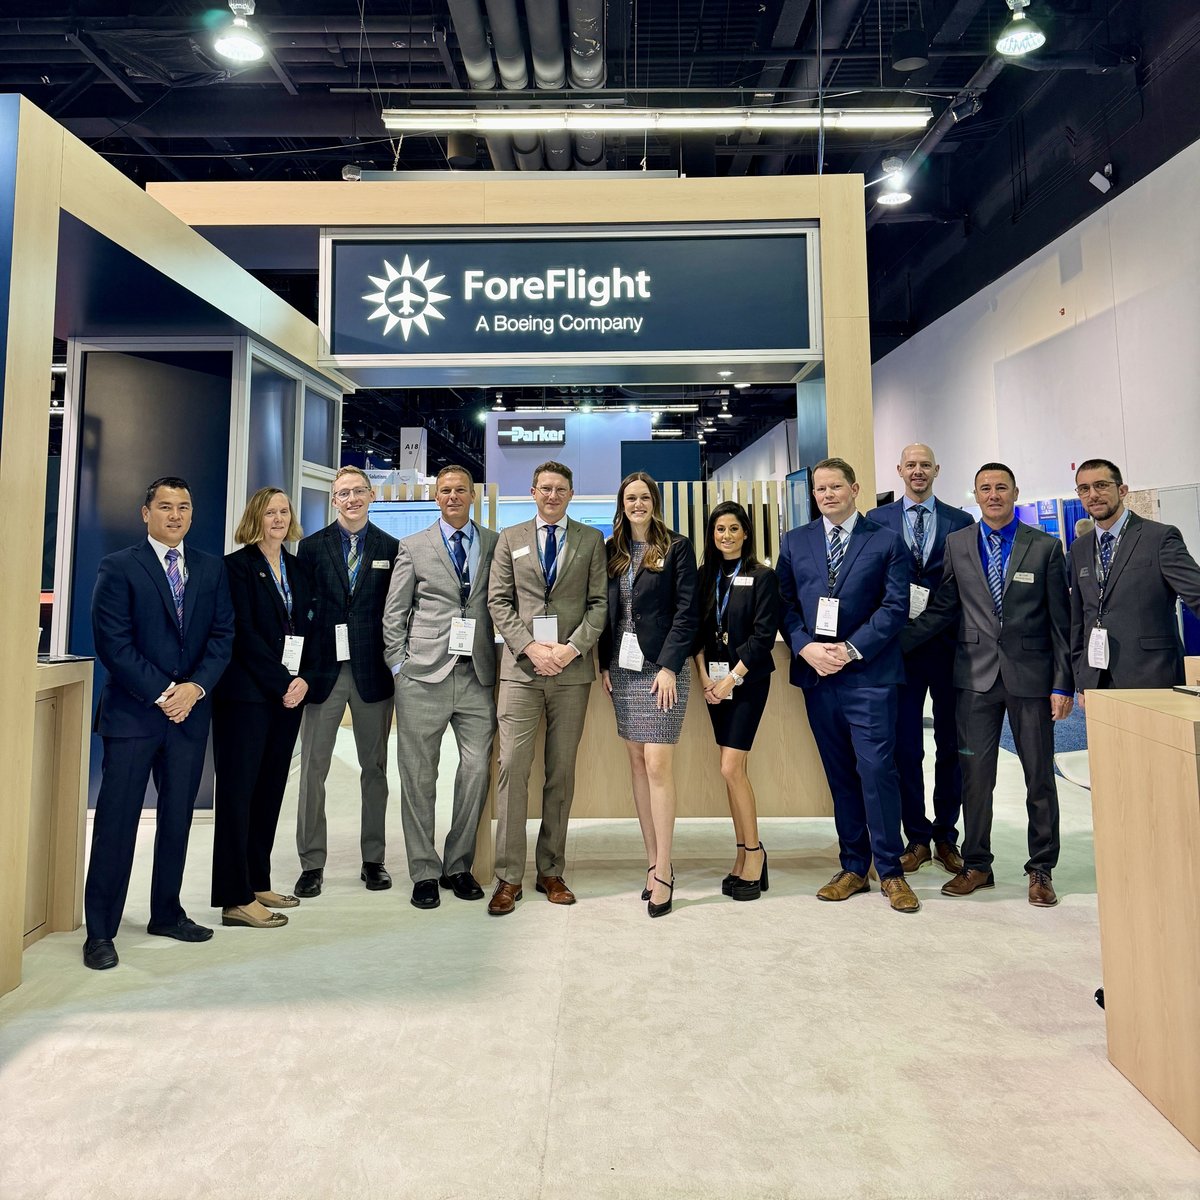 Another Heli-Expo in the books! We had a blast demonstrating our products and talking shop with the helicopter community. Click here to learn more about how ForeFlight works with helicopter operations to increase safety and efficiency: bit.ly/2sMGezJ